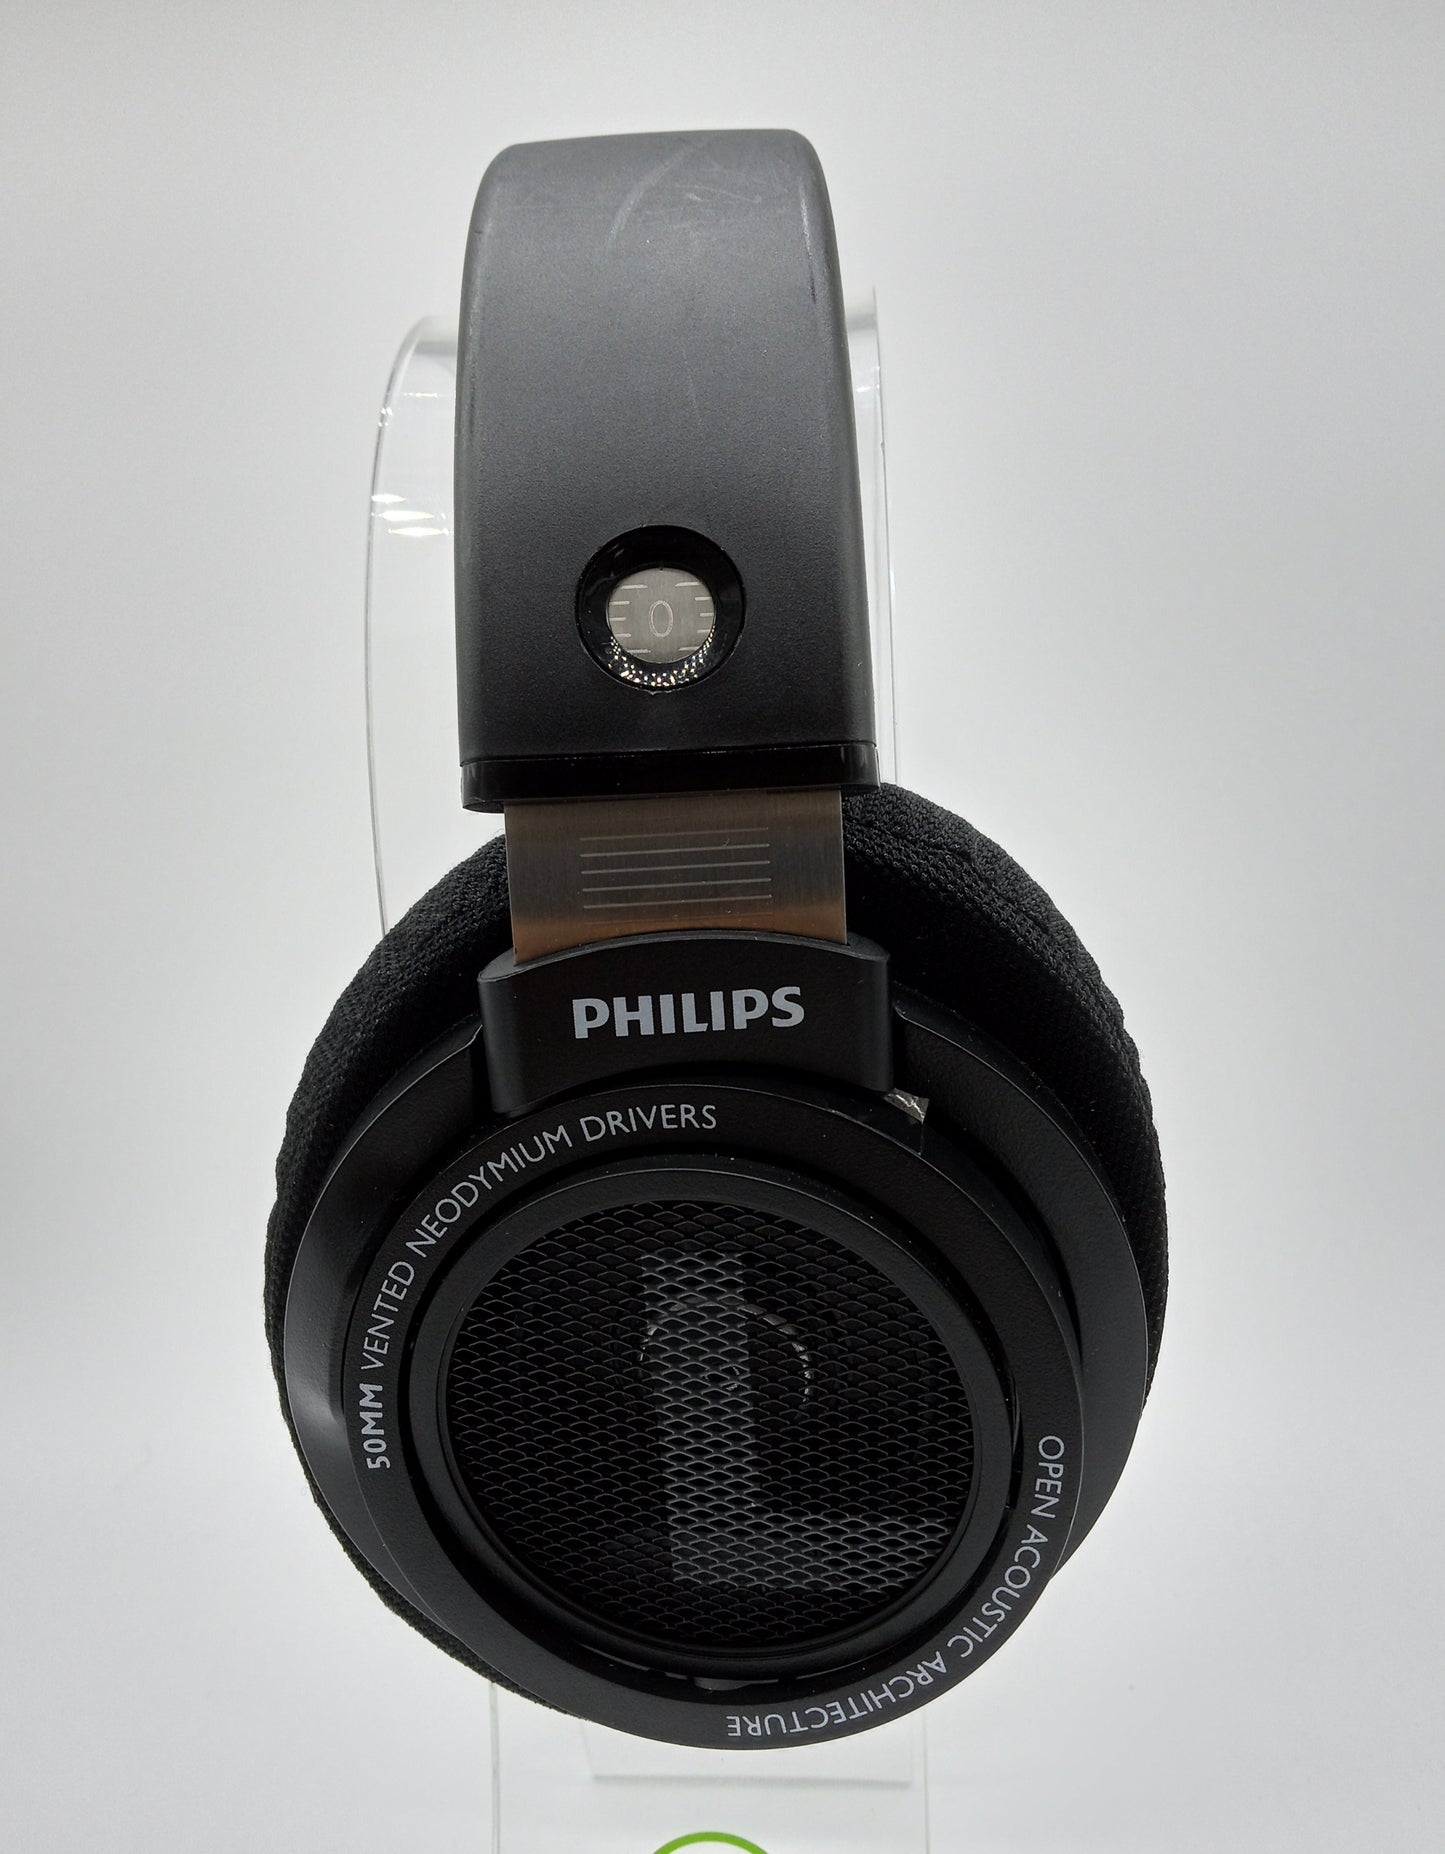 Phillips SHP9500 Wired Over-Ear Headphones Black